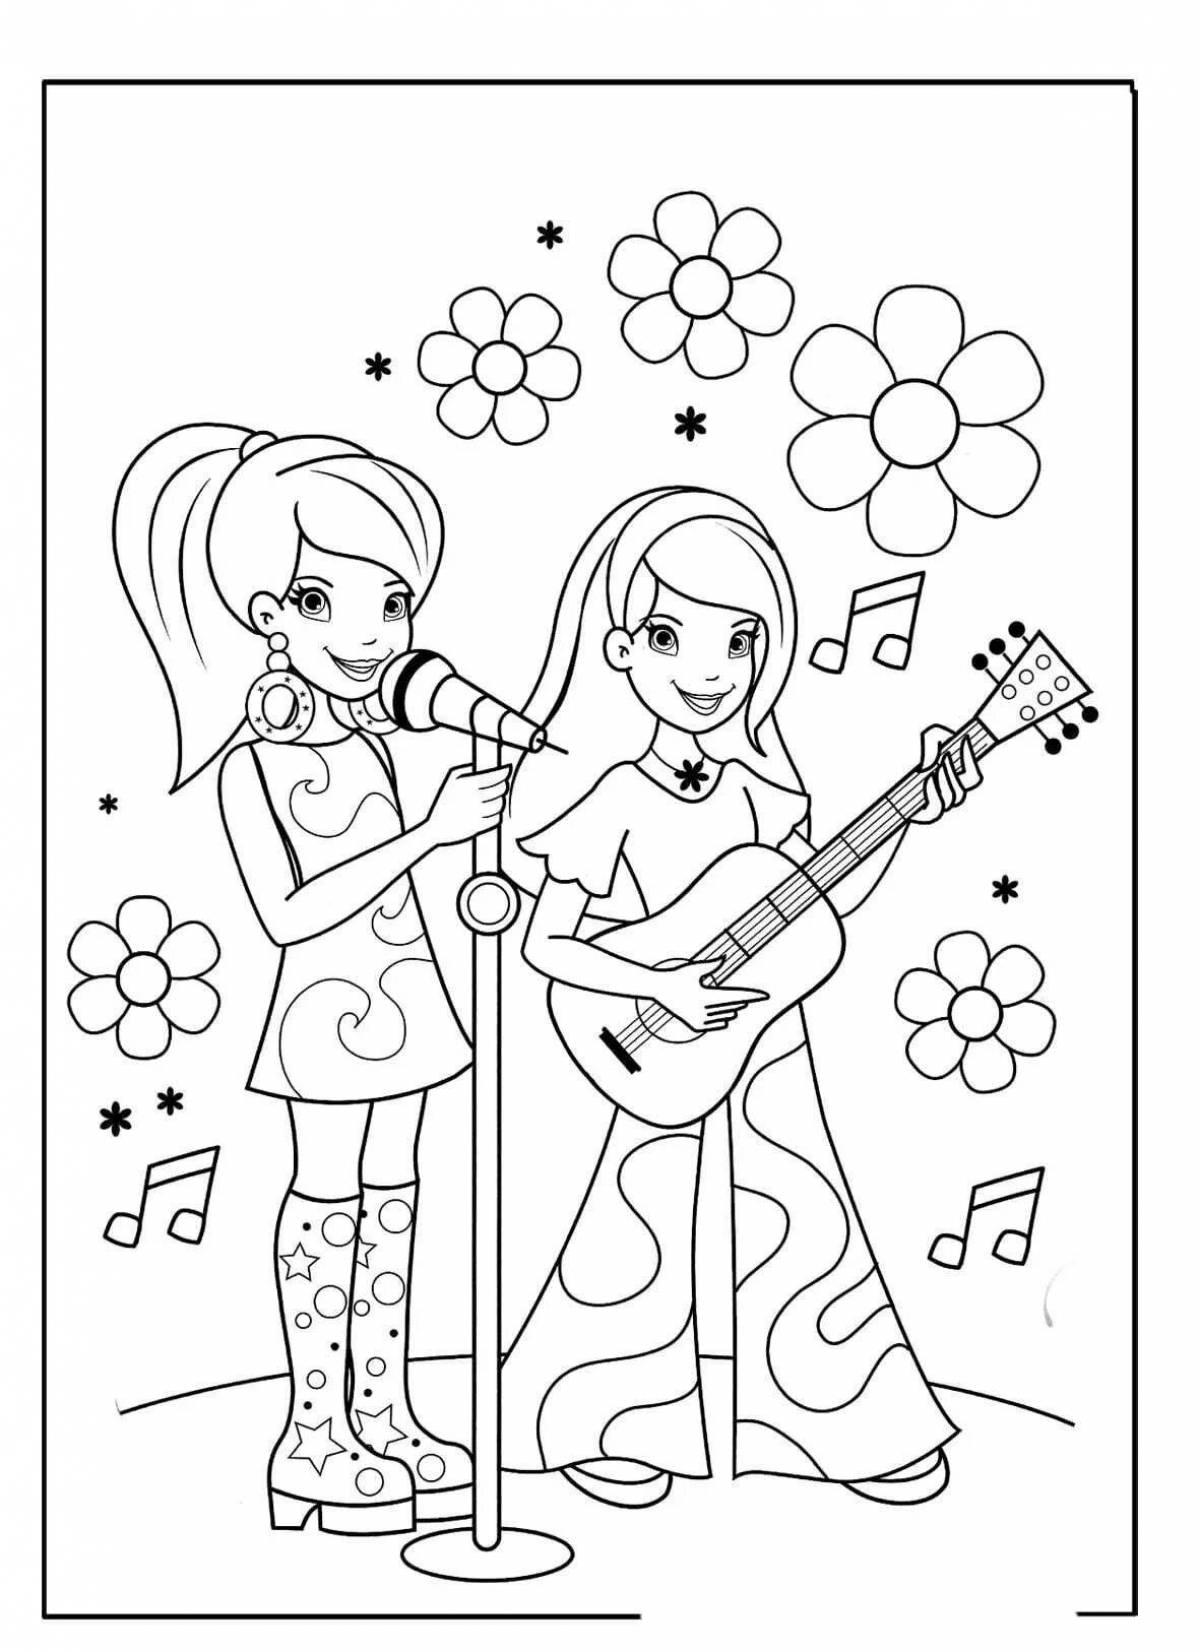 Lego friends magic coloring page